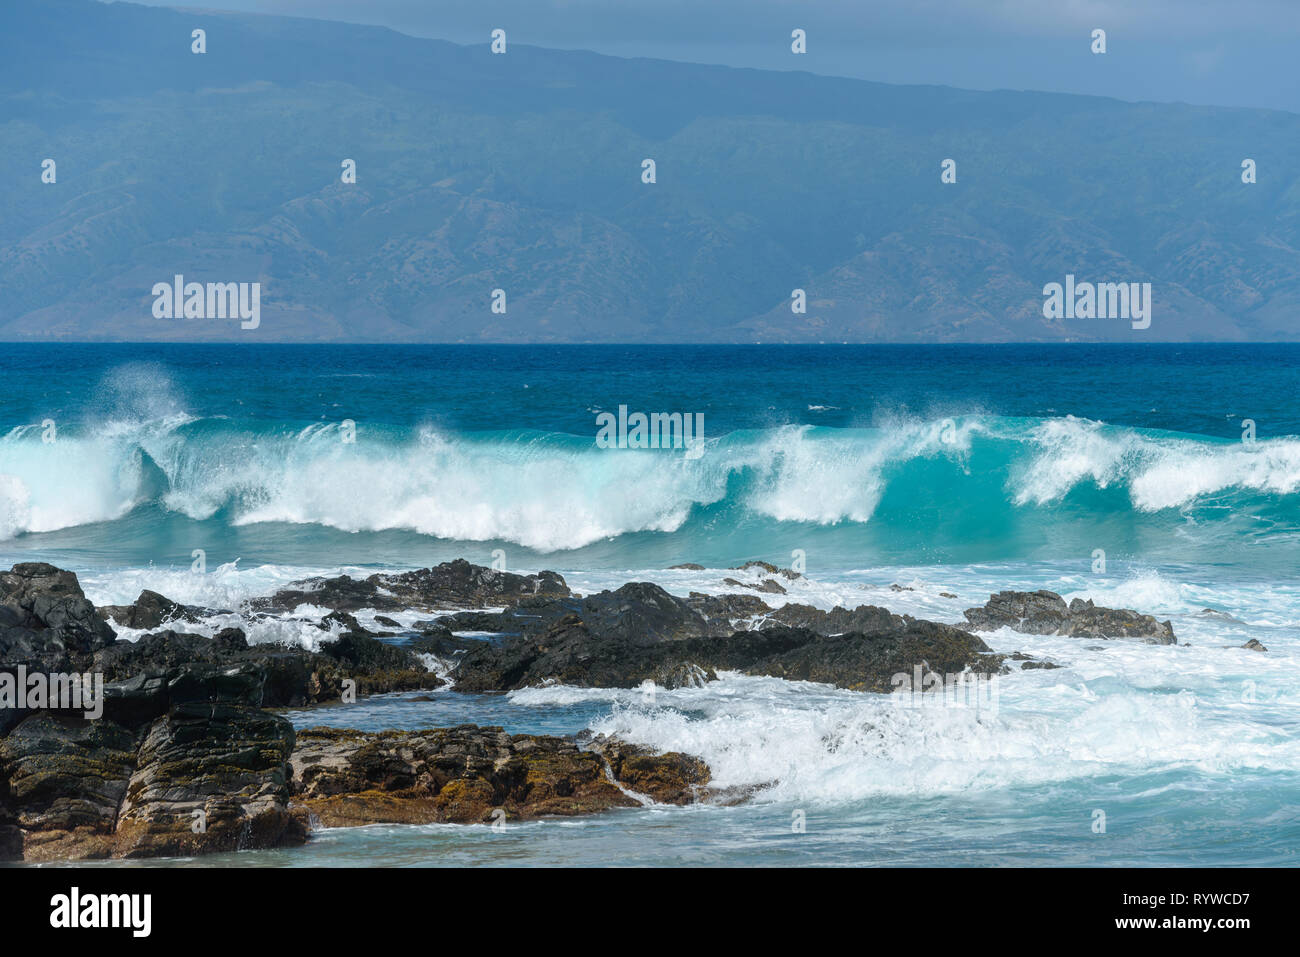 Breaking Waves - Big breaking blue waves rushing towards black rocky coast, with a tropical island in the background. Maui, Hawaii, USA. Stock Photo